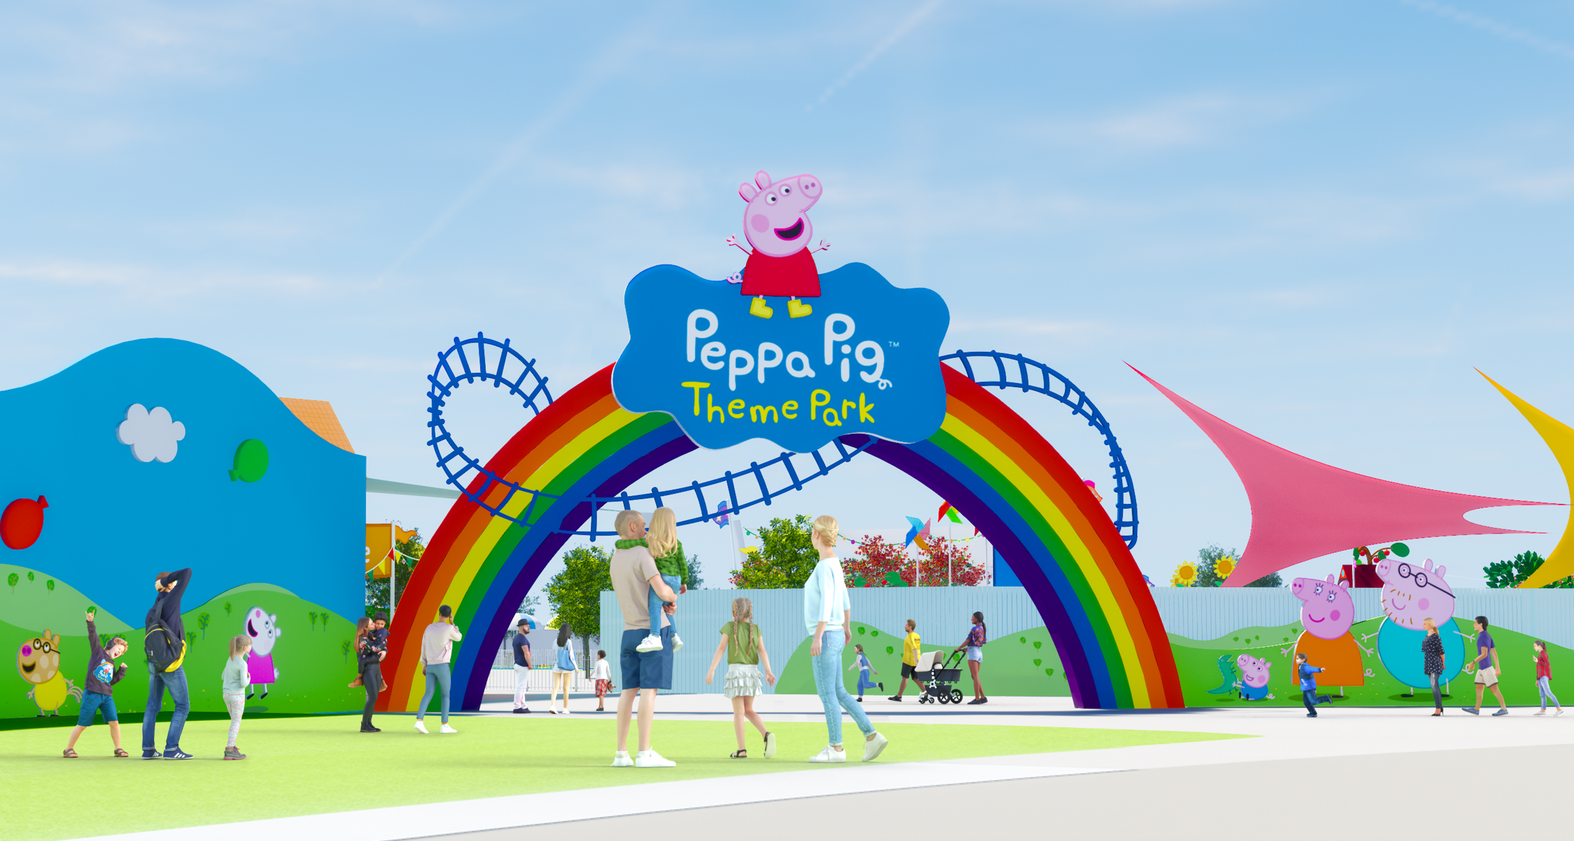 Peppa Pig Theme Park Entrance in Florida